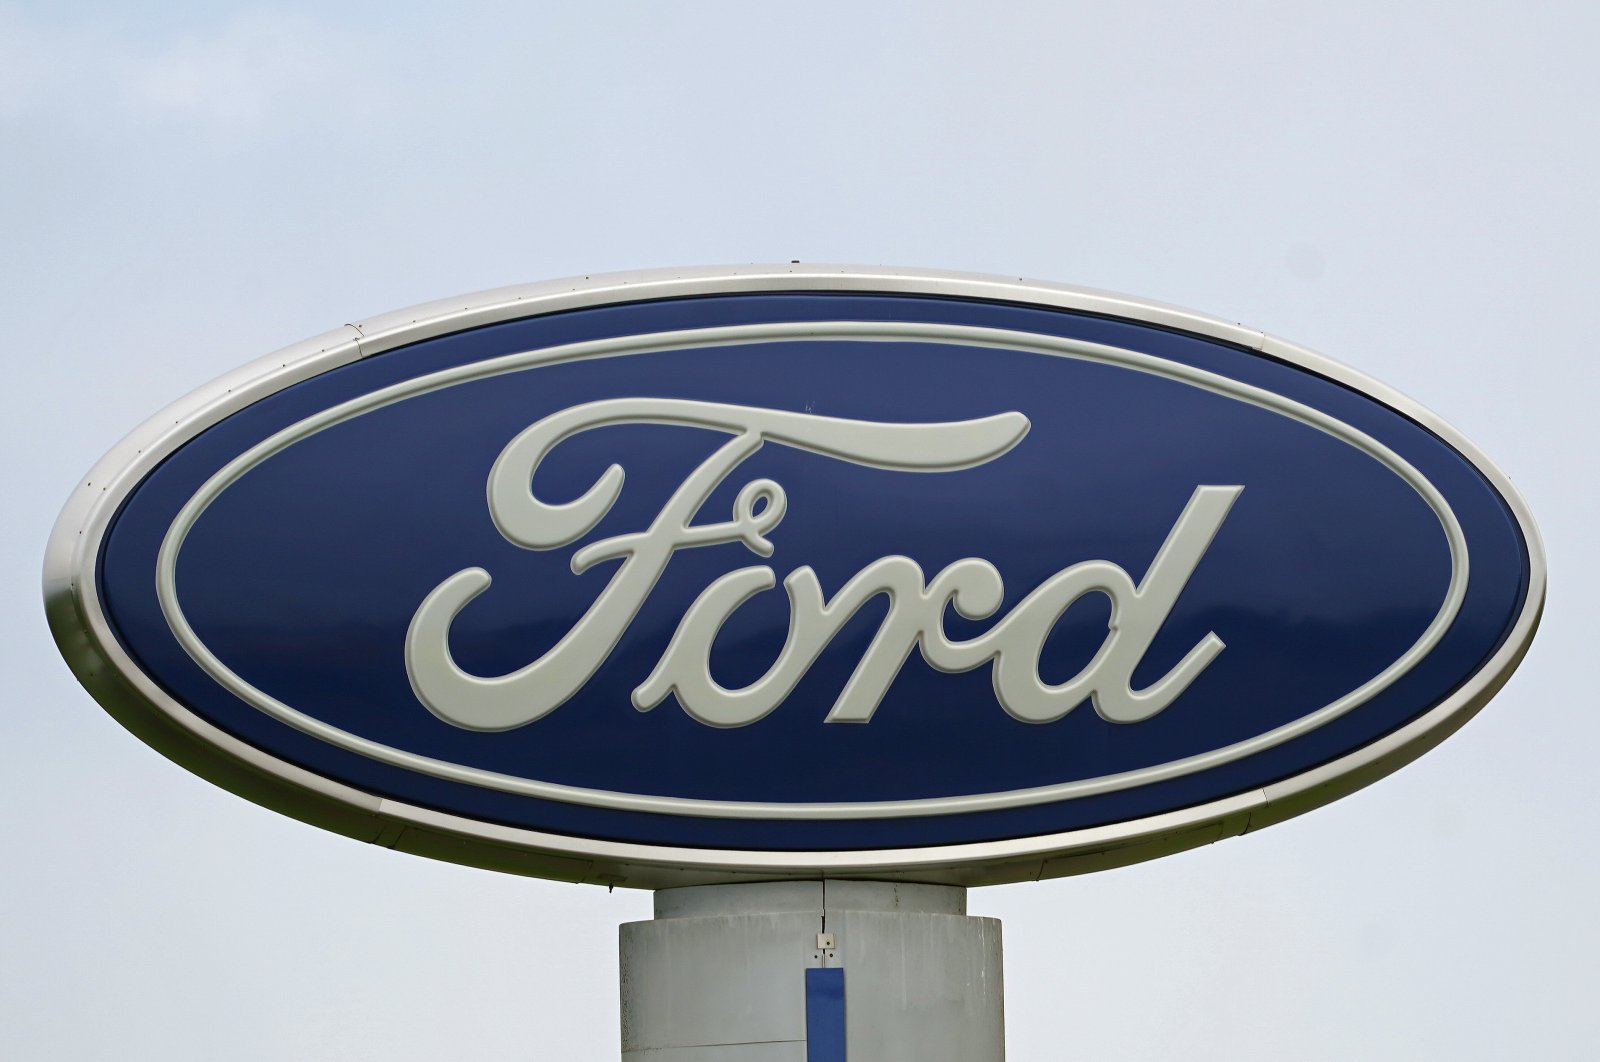 A Ford logo is seen on signage at Country Ford in Graham, North Carolina, U.S., July 27, 2021. (AP Photo)